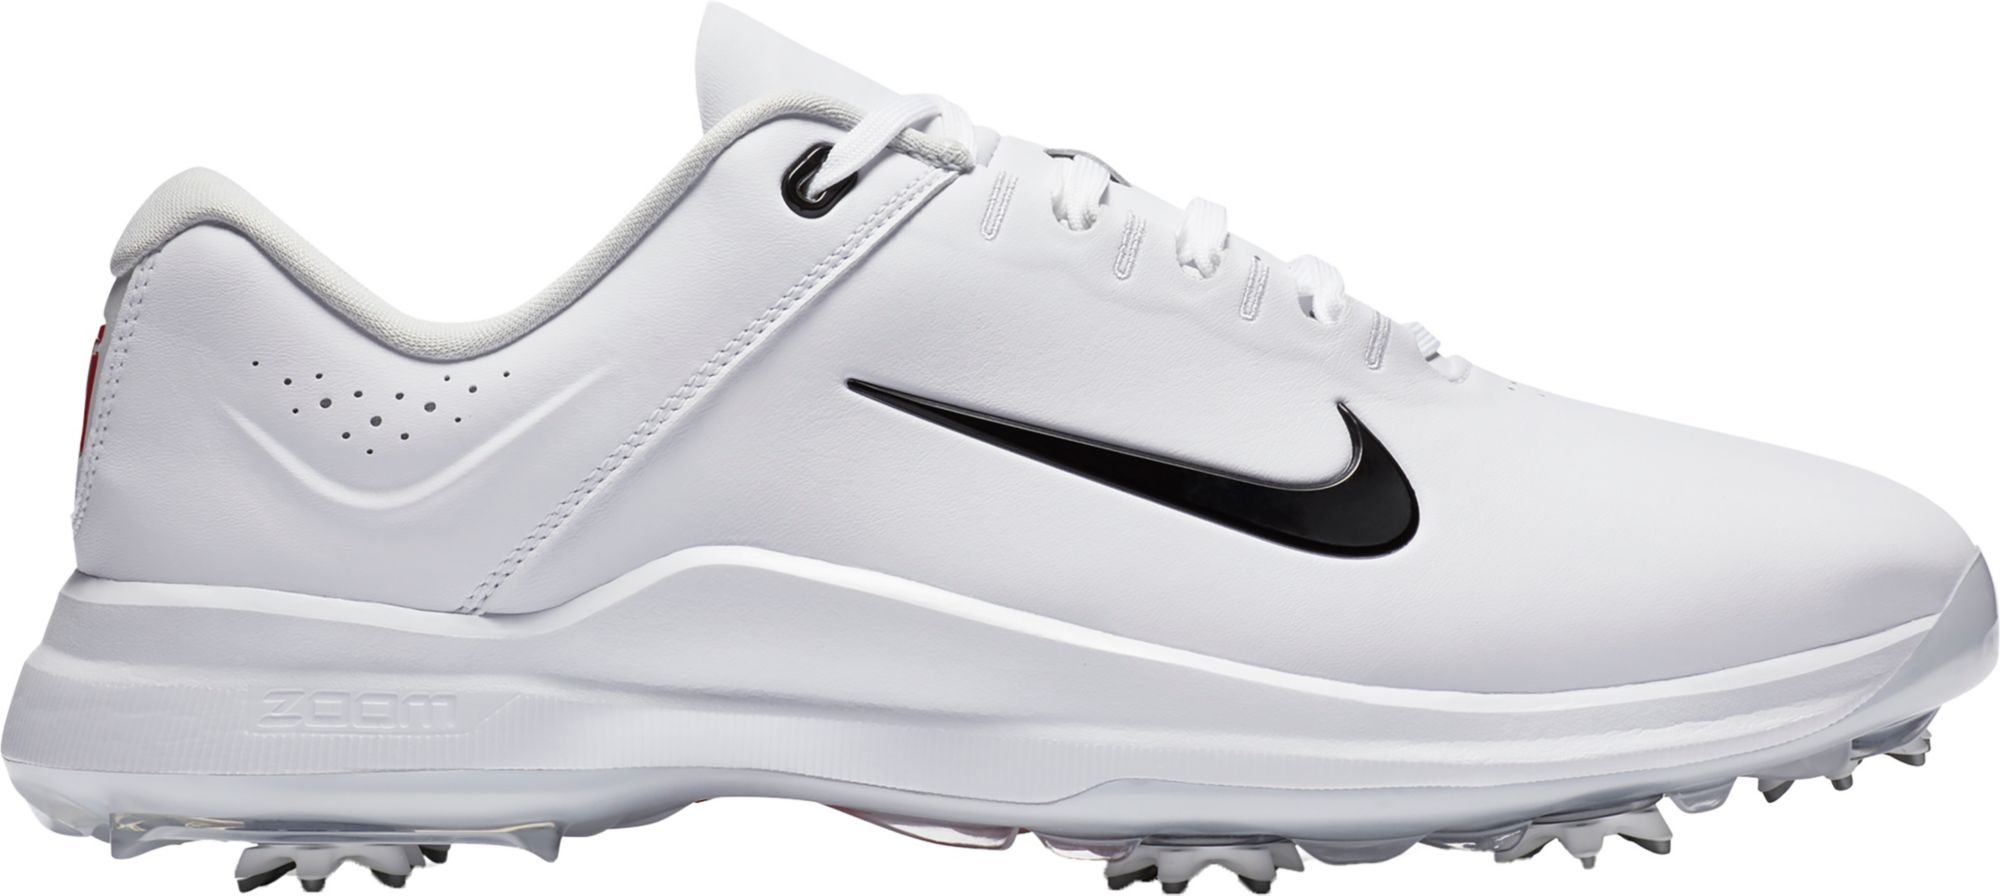 all white nike golf shoes